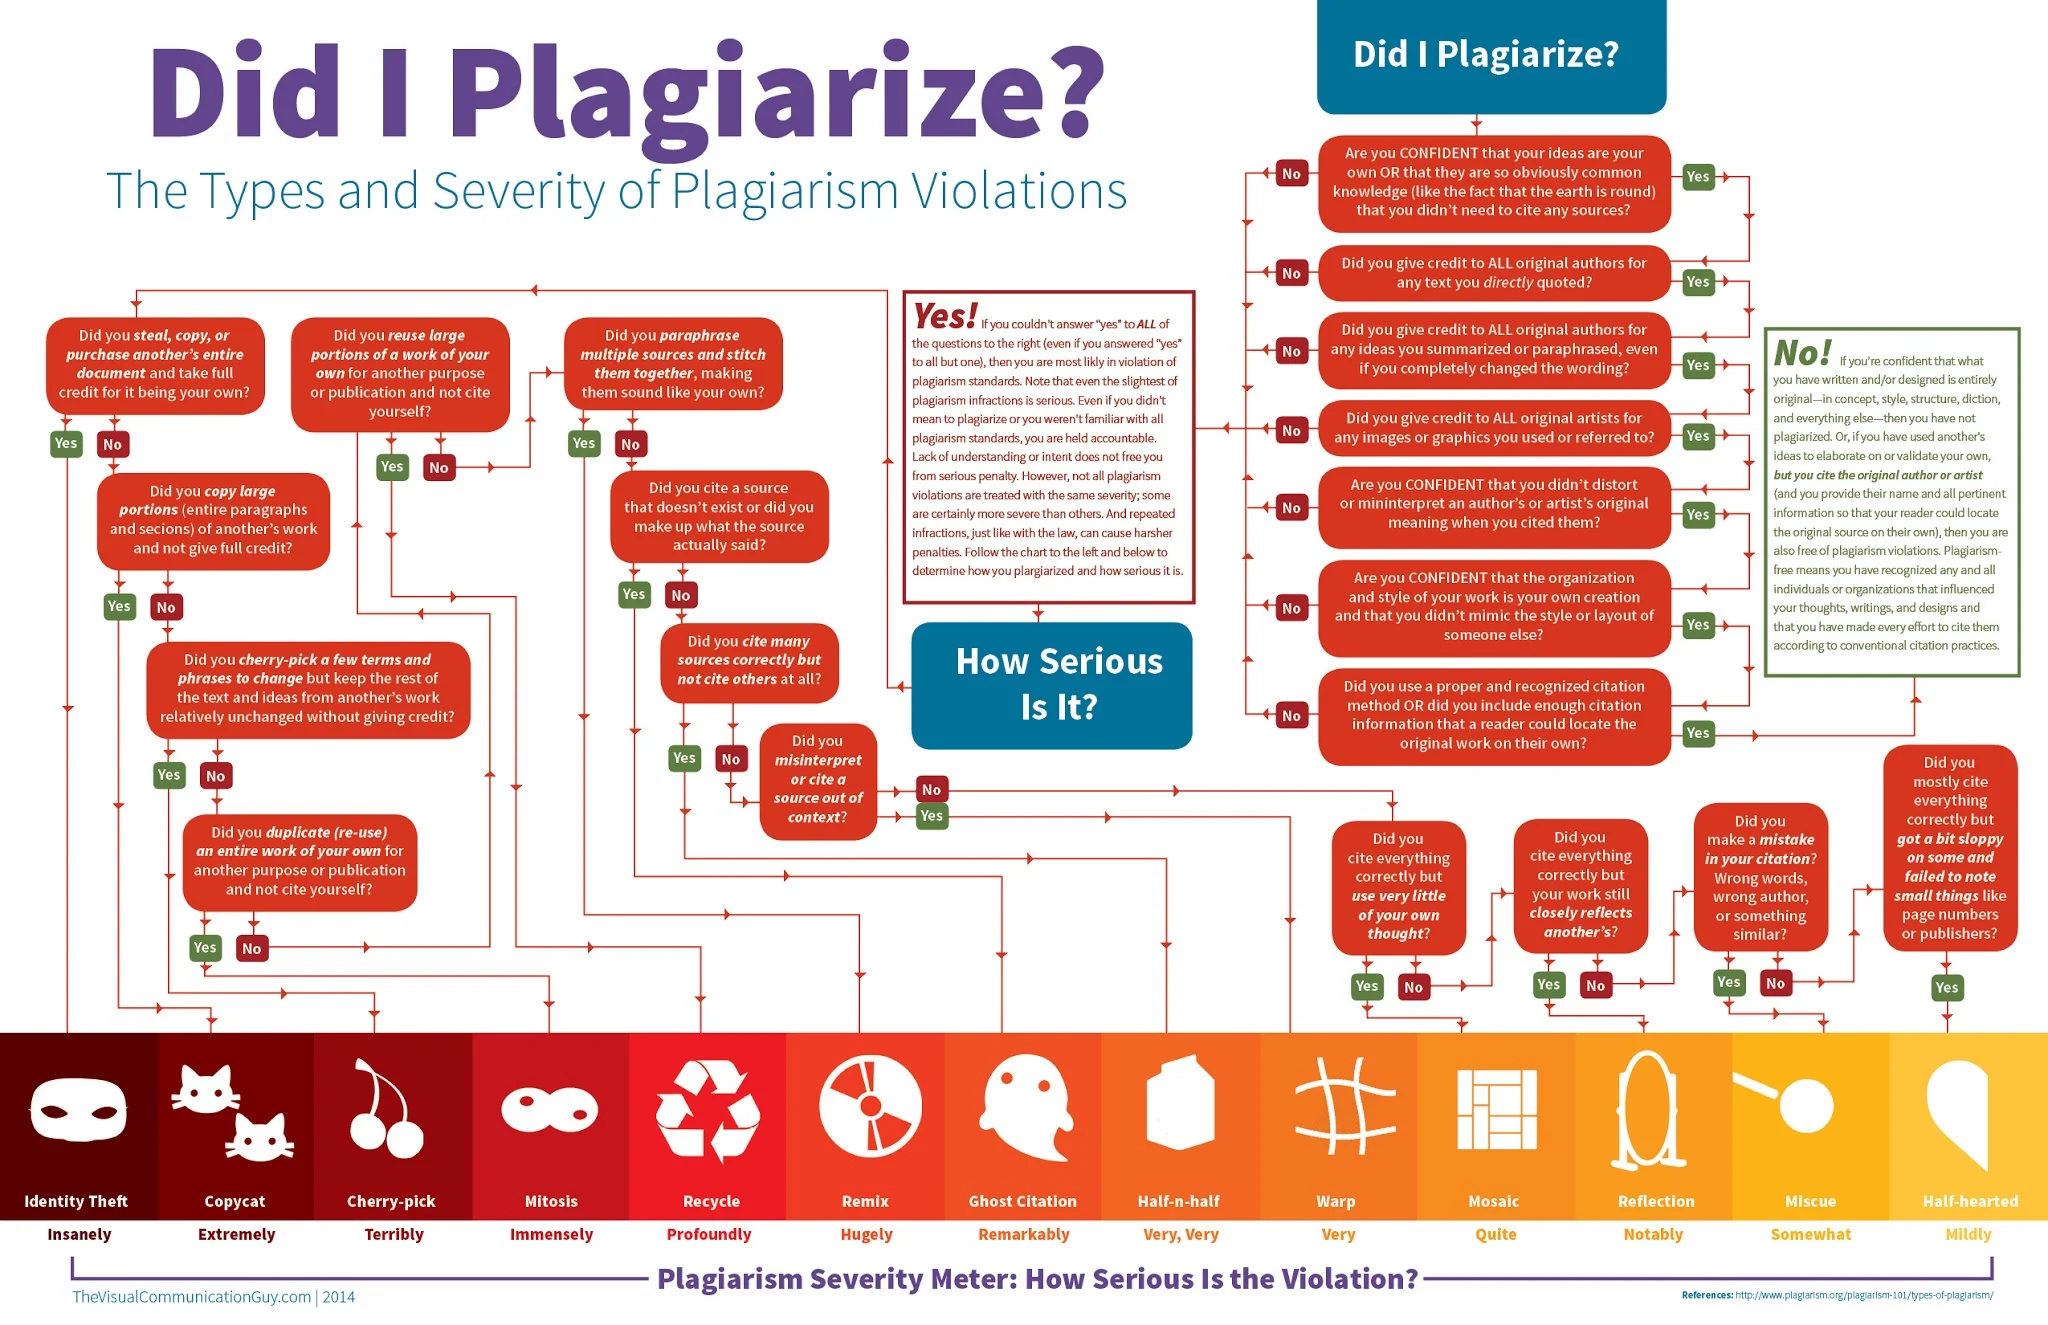 Did I Plagiarize? The Types and Severity of Plagiarism Violations